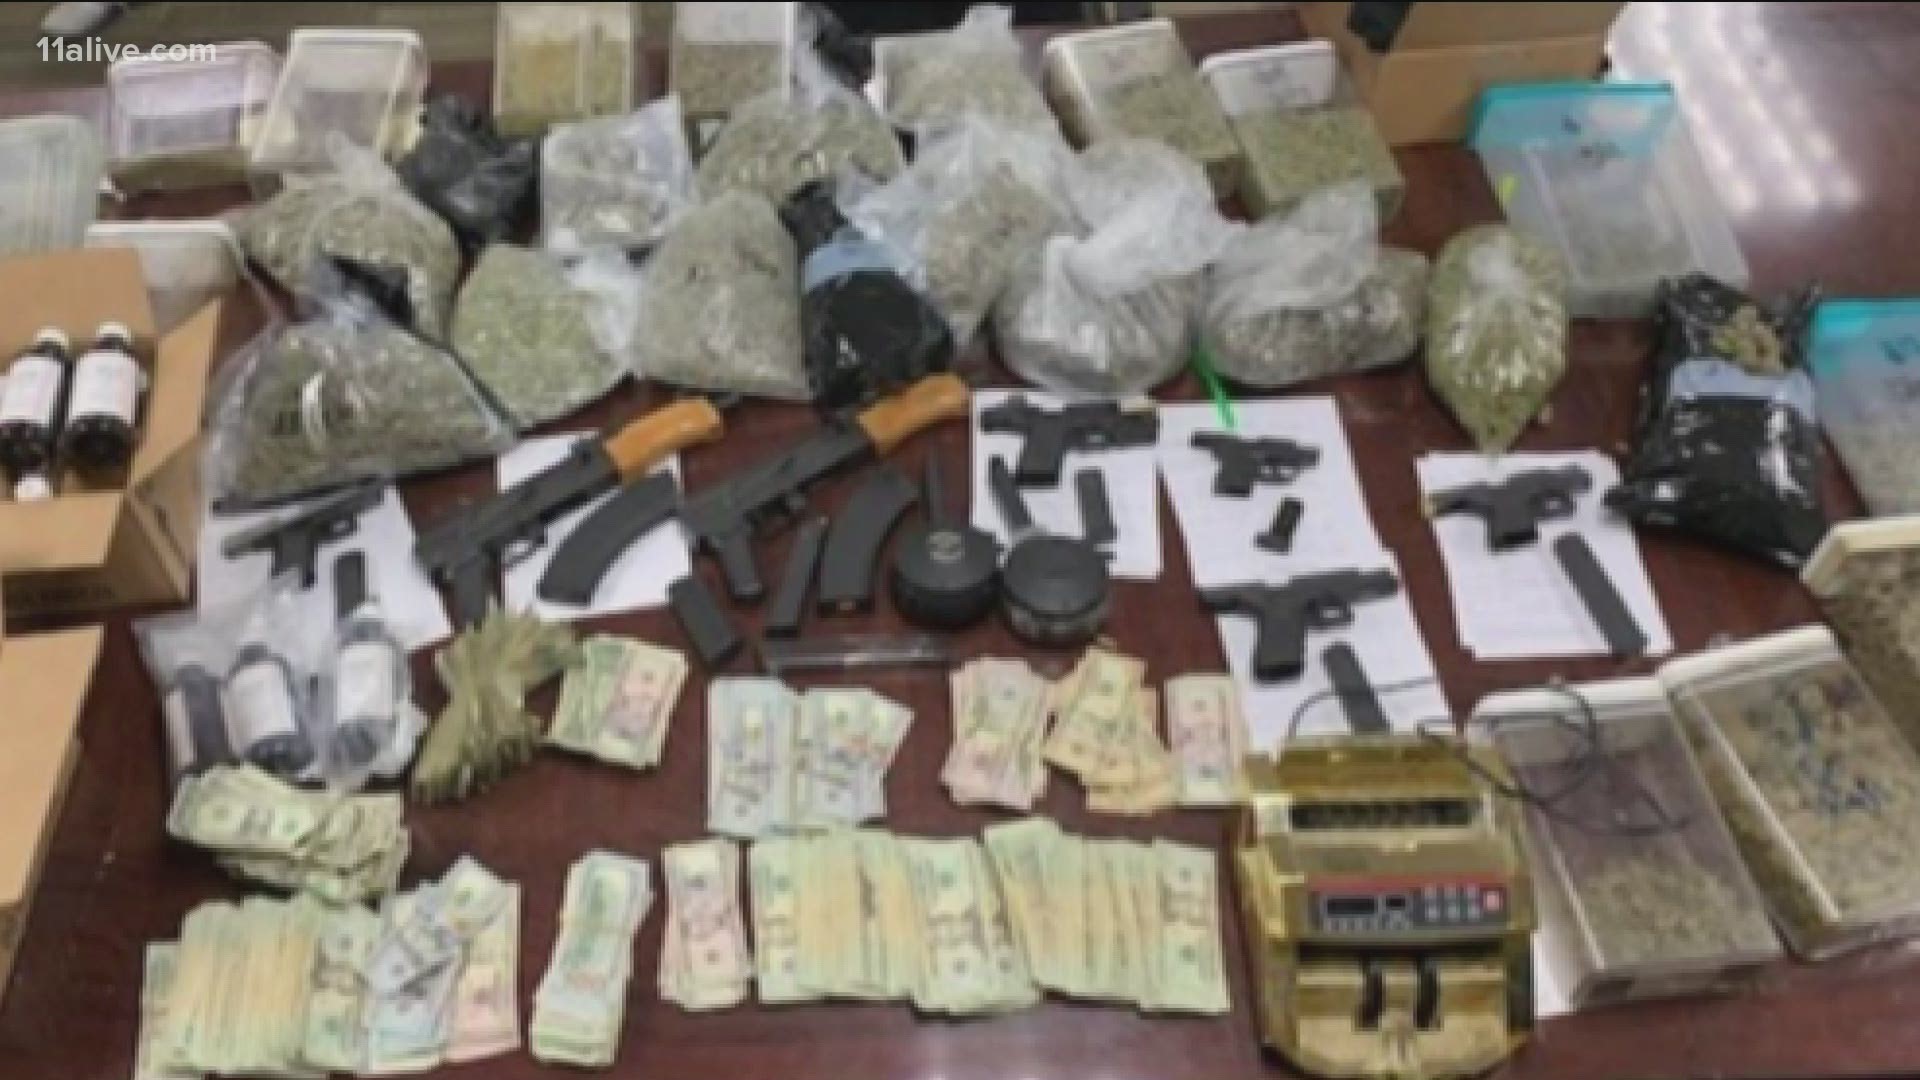 Atlanta drug bust uncovers pounds, pints of drugs, modified weapons and